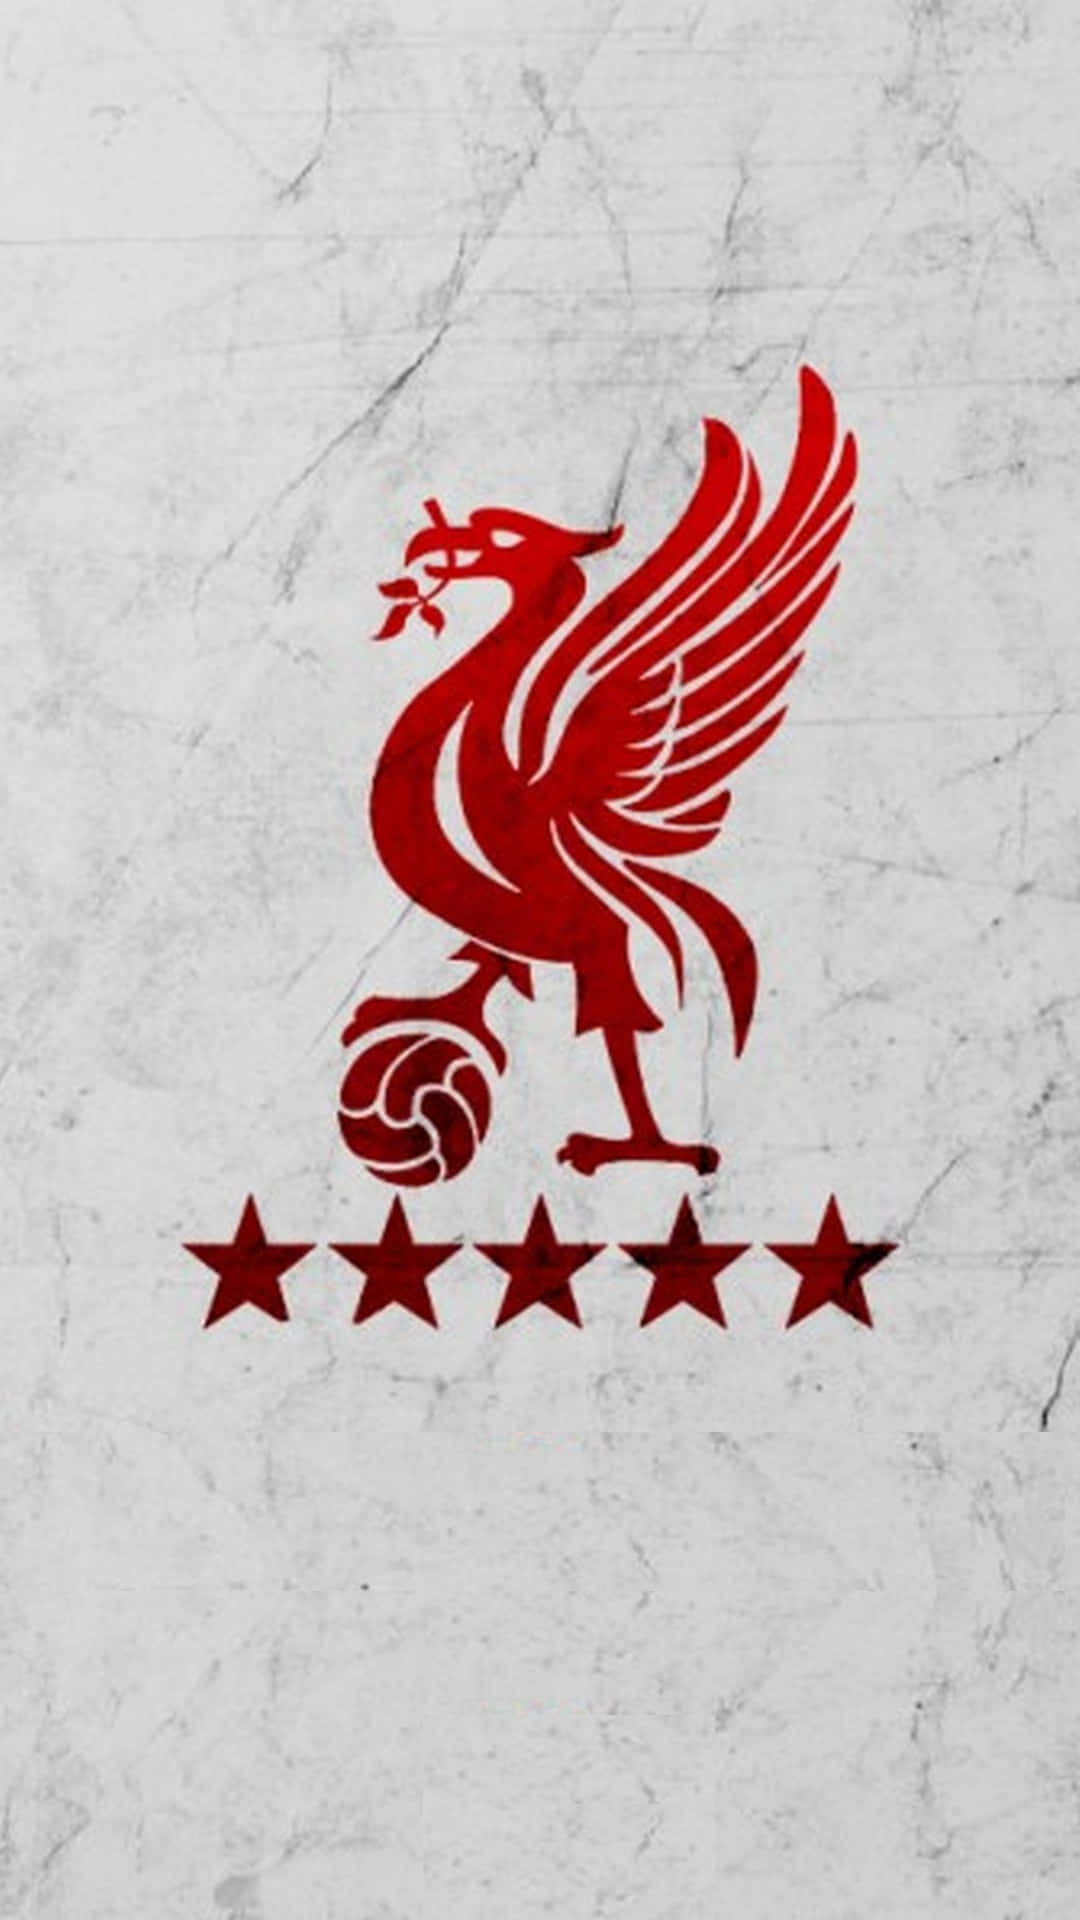 Discover the power of Liverpool FC with the new Liverpool Iphone Wallpaper